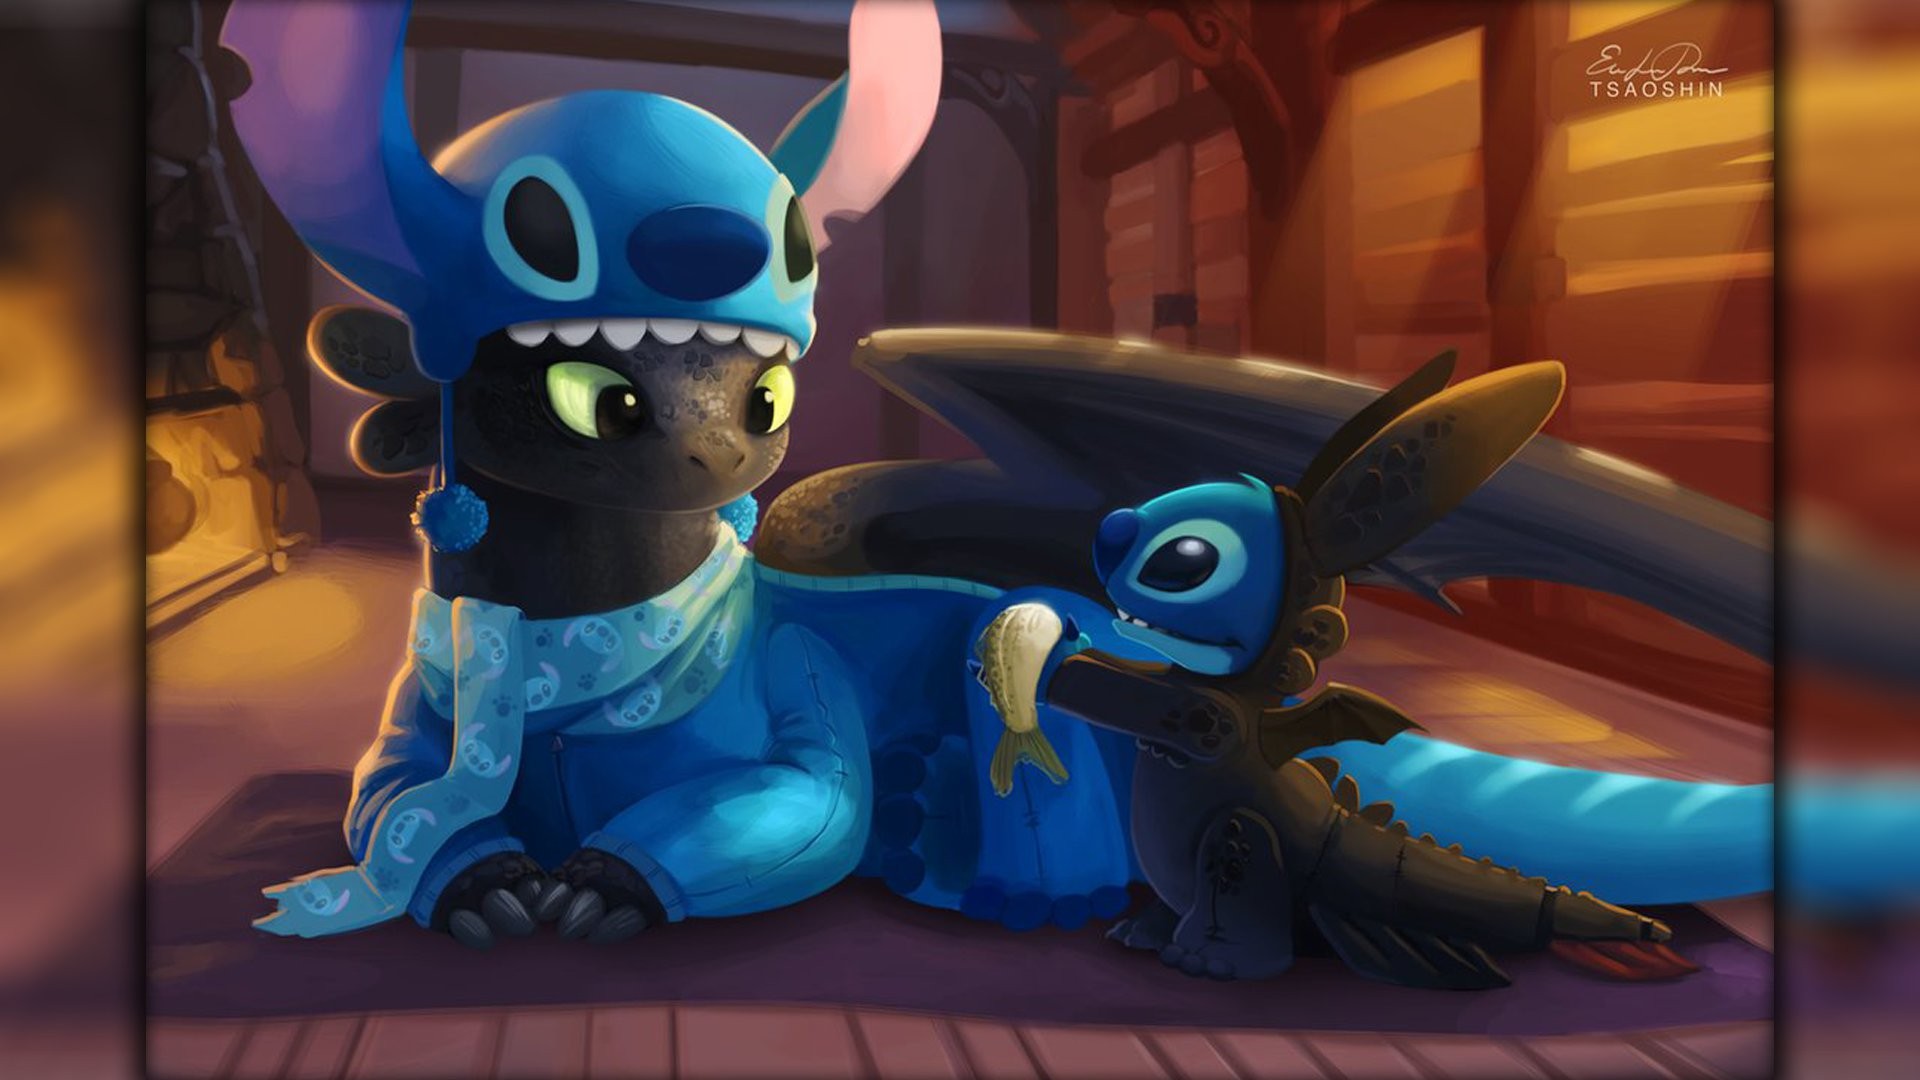 General 1920x1080 Lilo and Stitch dragon Toothless How to Train Your Dragon Stitch movies animated movies fan art DeviantArt digital art watermarked